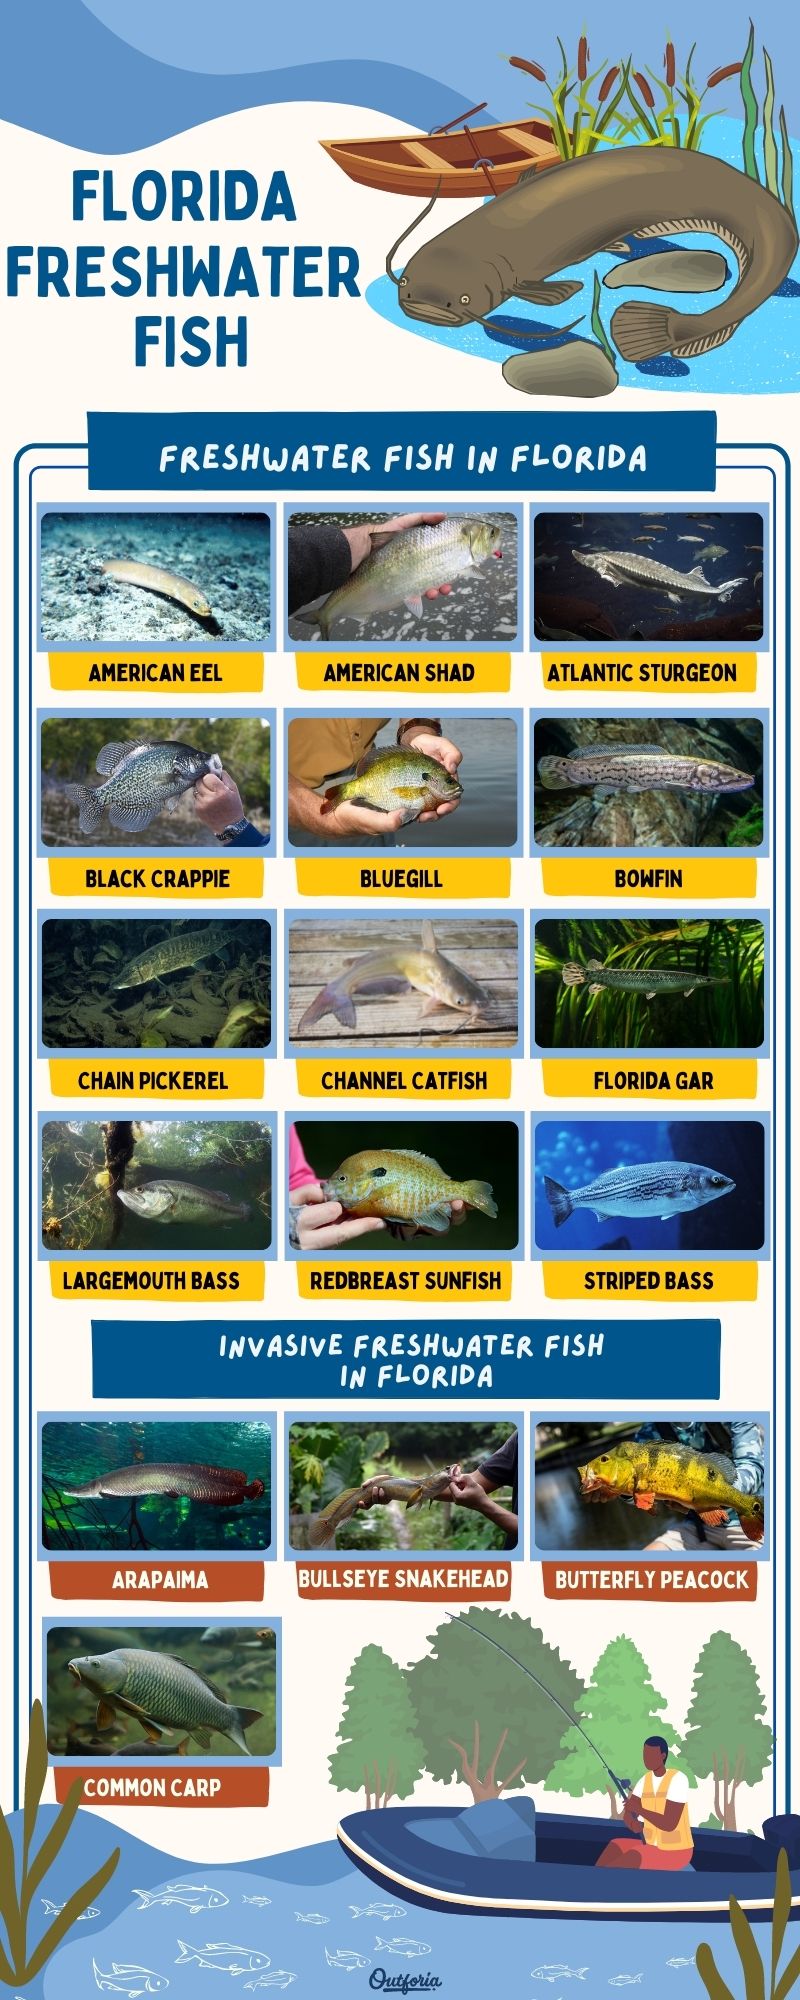 chart of names and images of Florida freshwater fish and invasive Florida freshwater fish